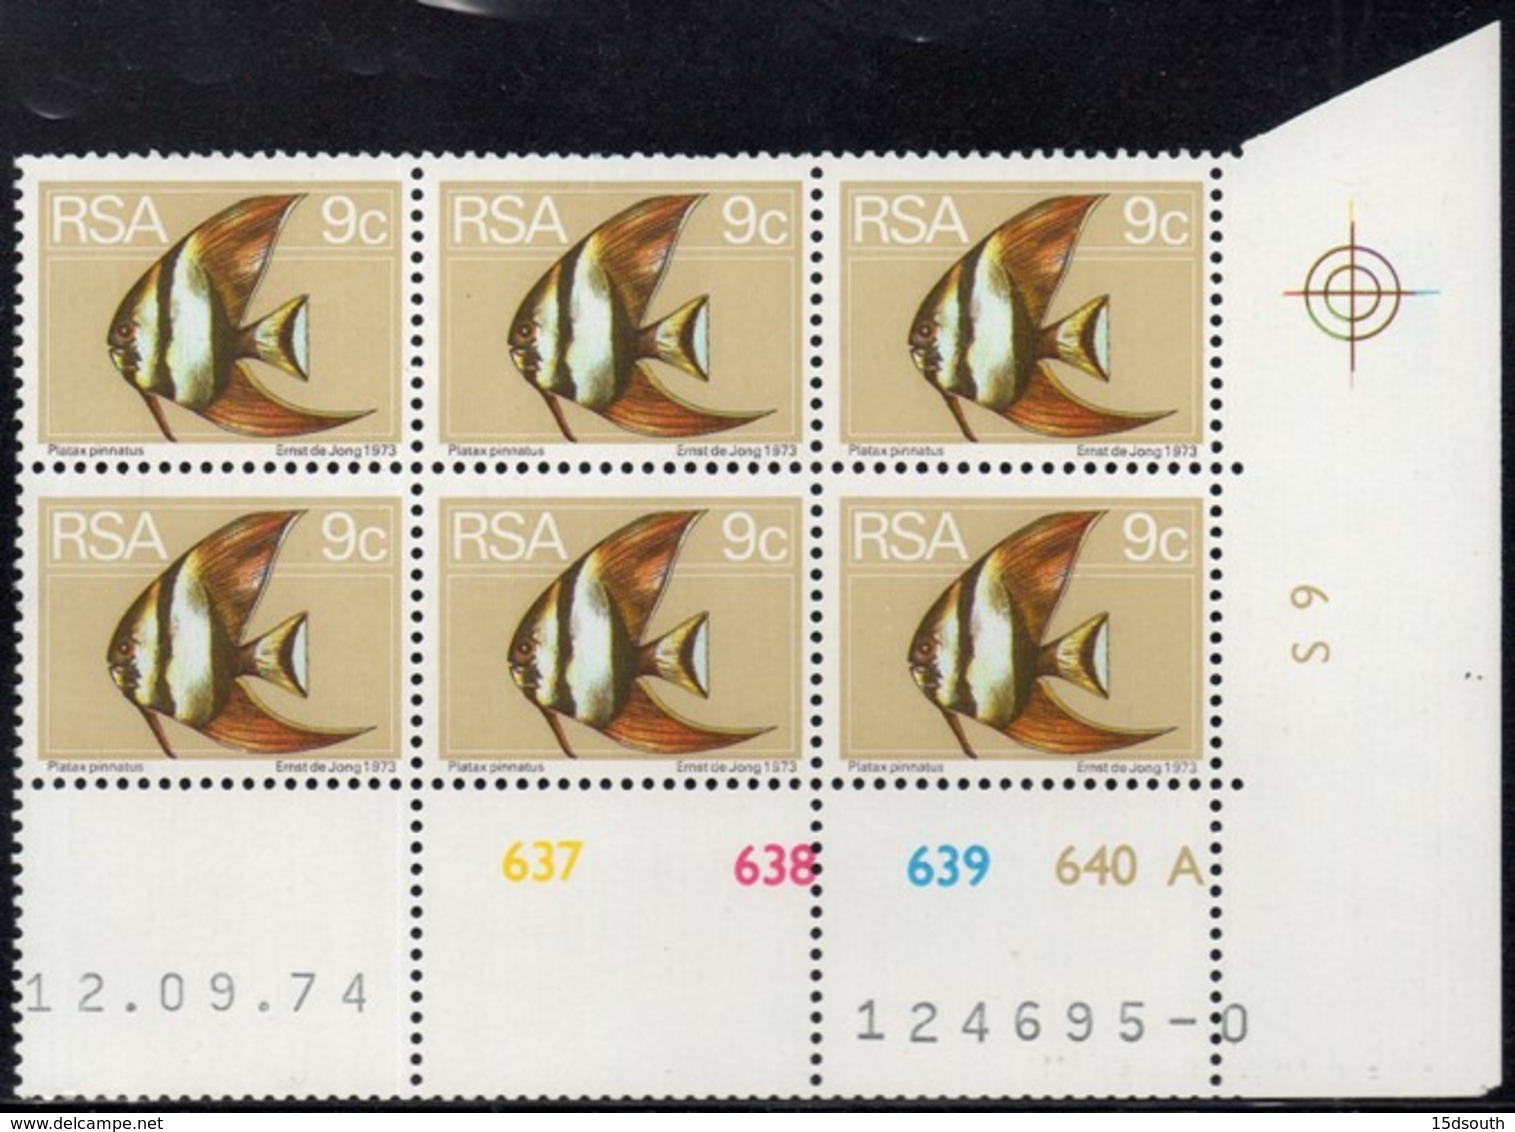 South Africa - 1974 2nd Definitive 9c Angel Fish Control Block (1974.09.12) Pane A (**) # SG 355 - Blocs-feuillets